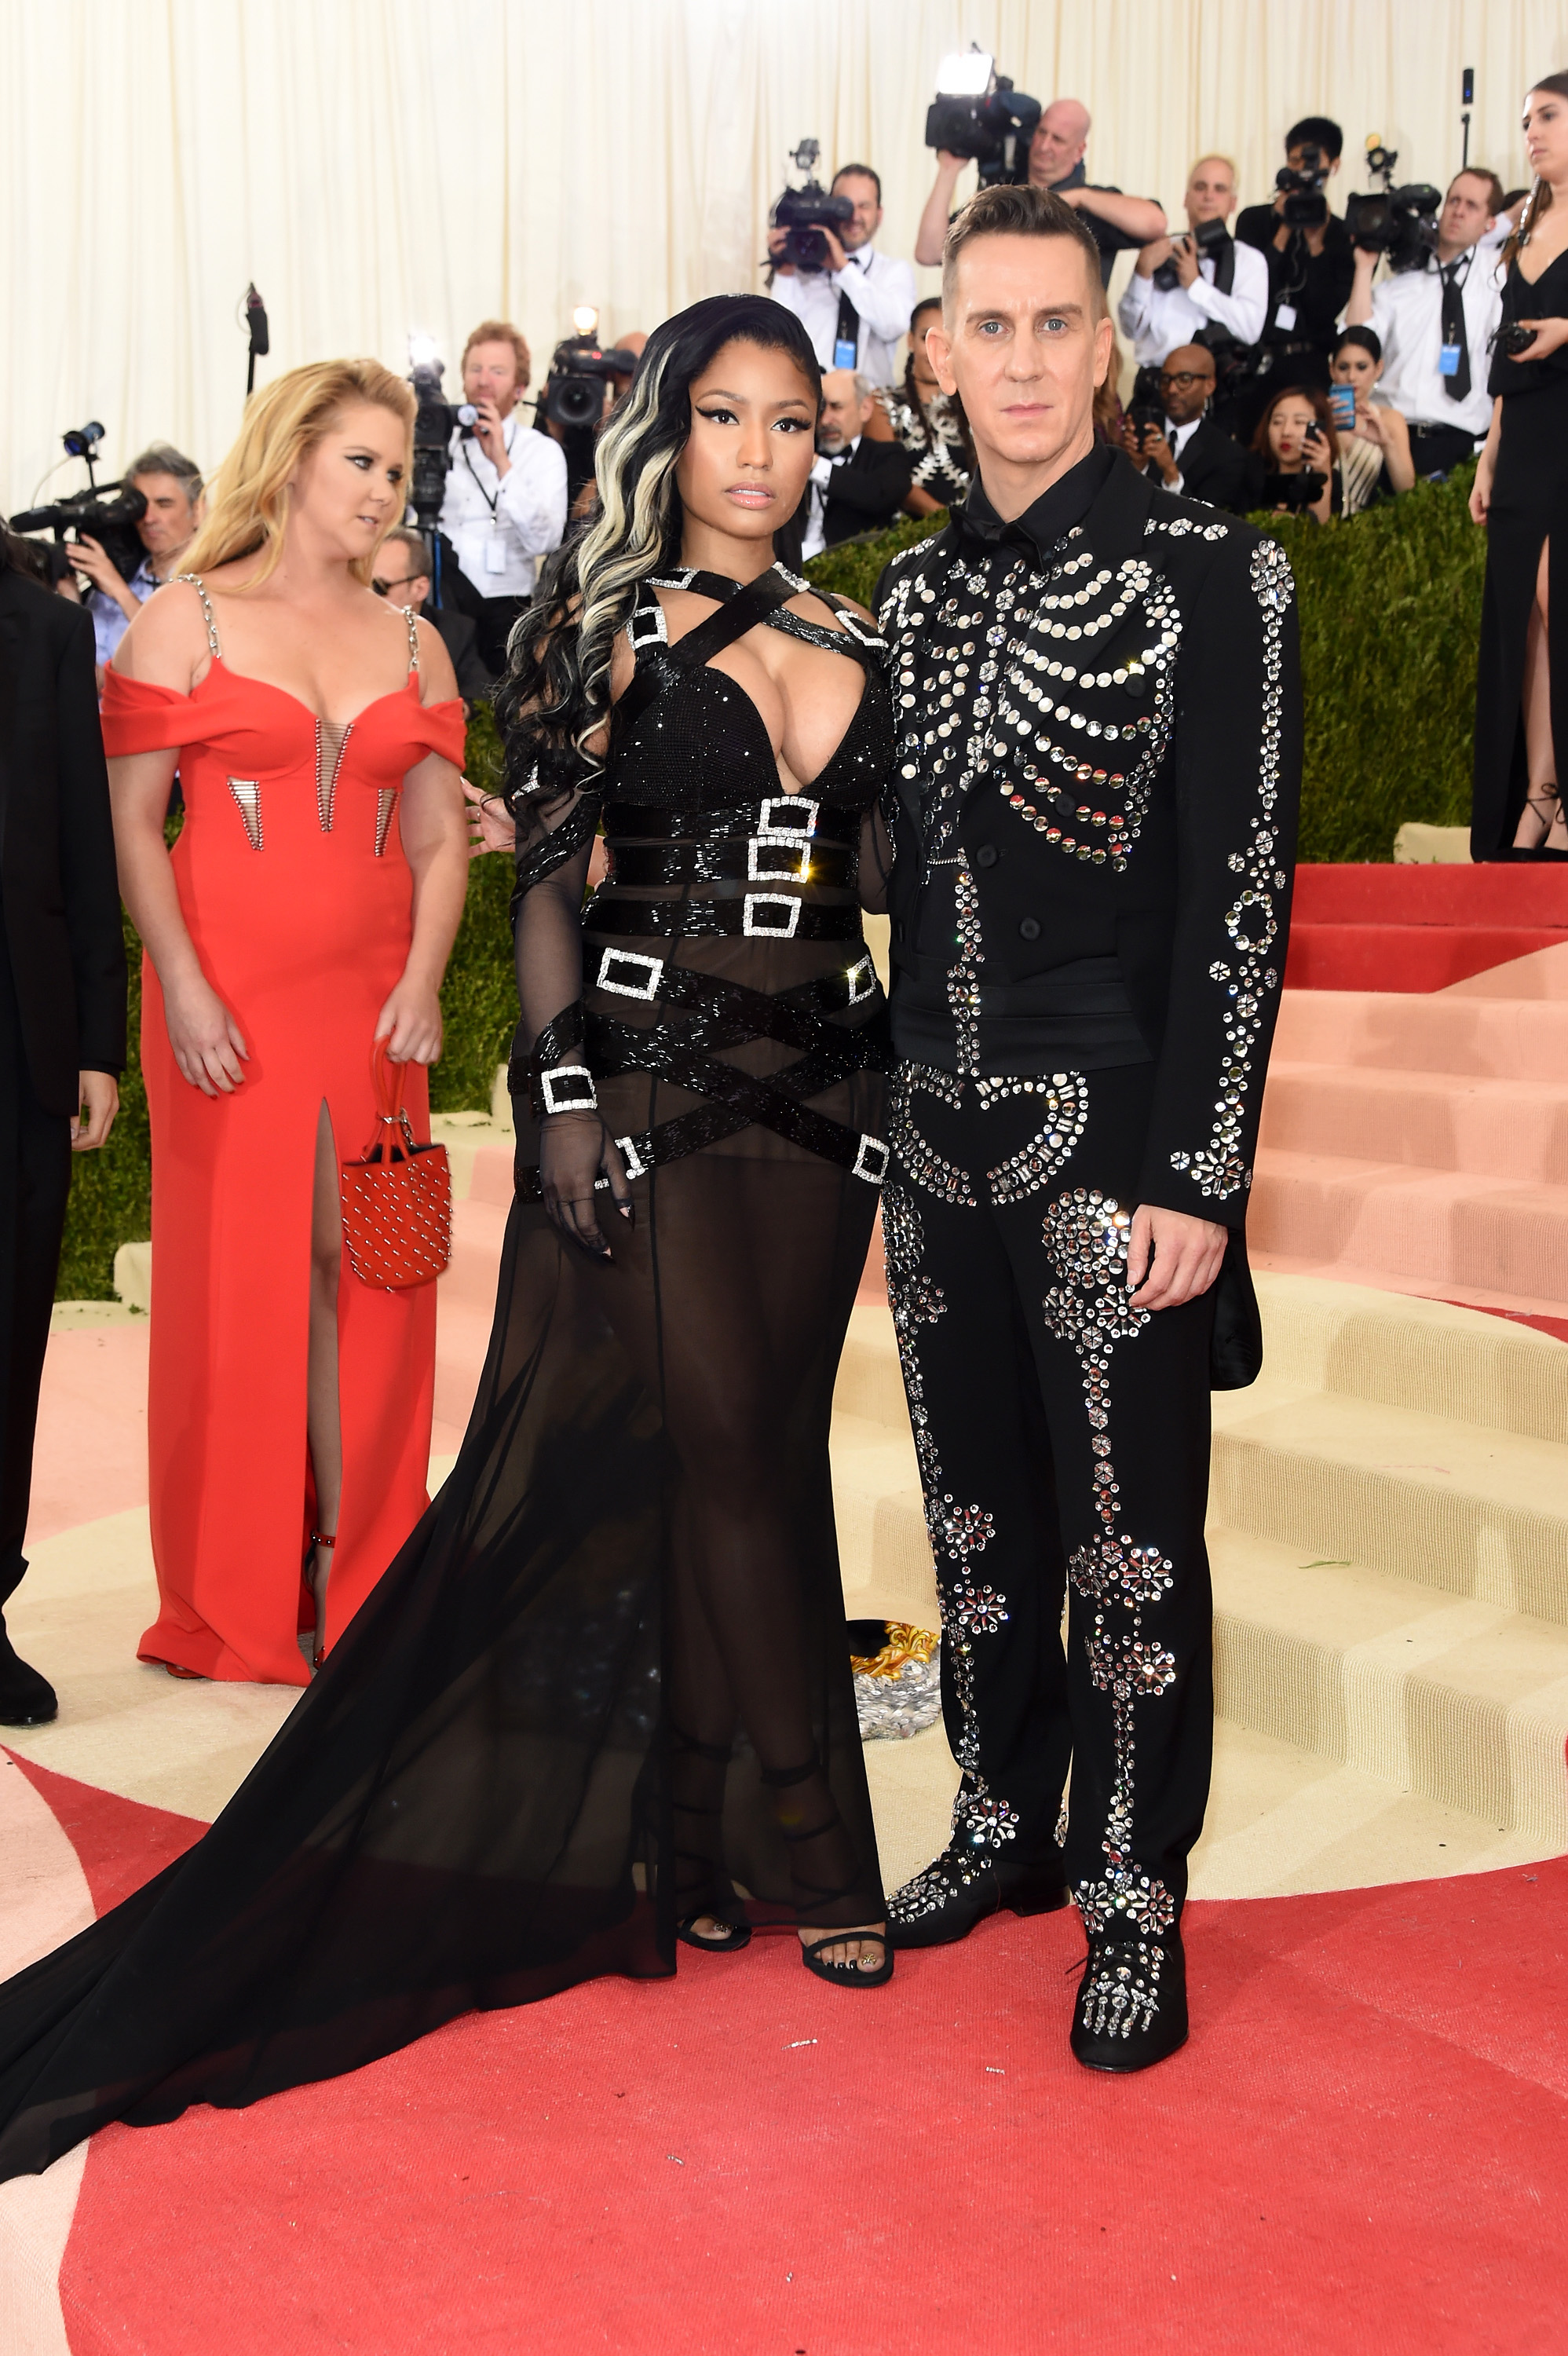 Nicki Minaj and Jeremy Scott attend "Manus x Machina: Fashion In An Age Of Technology" Costume Institute Gala at Metropolitan Museum of Art on May 2, 2016 in New York City.